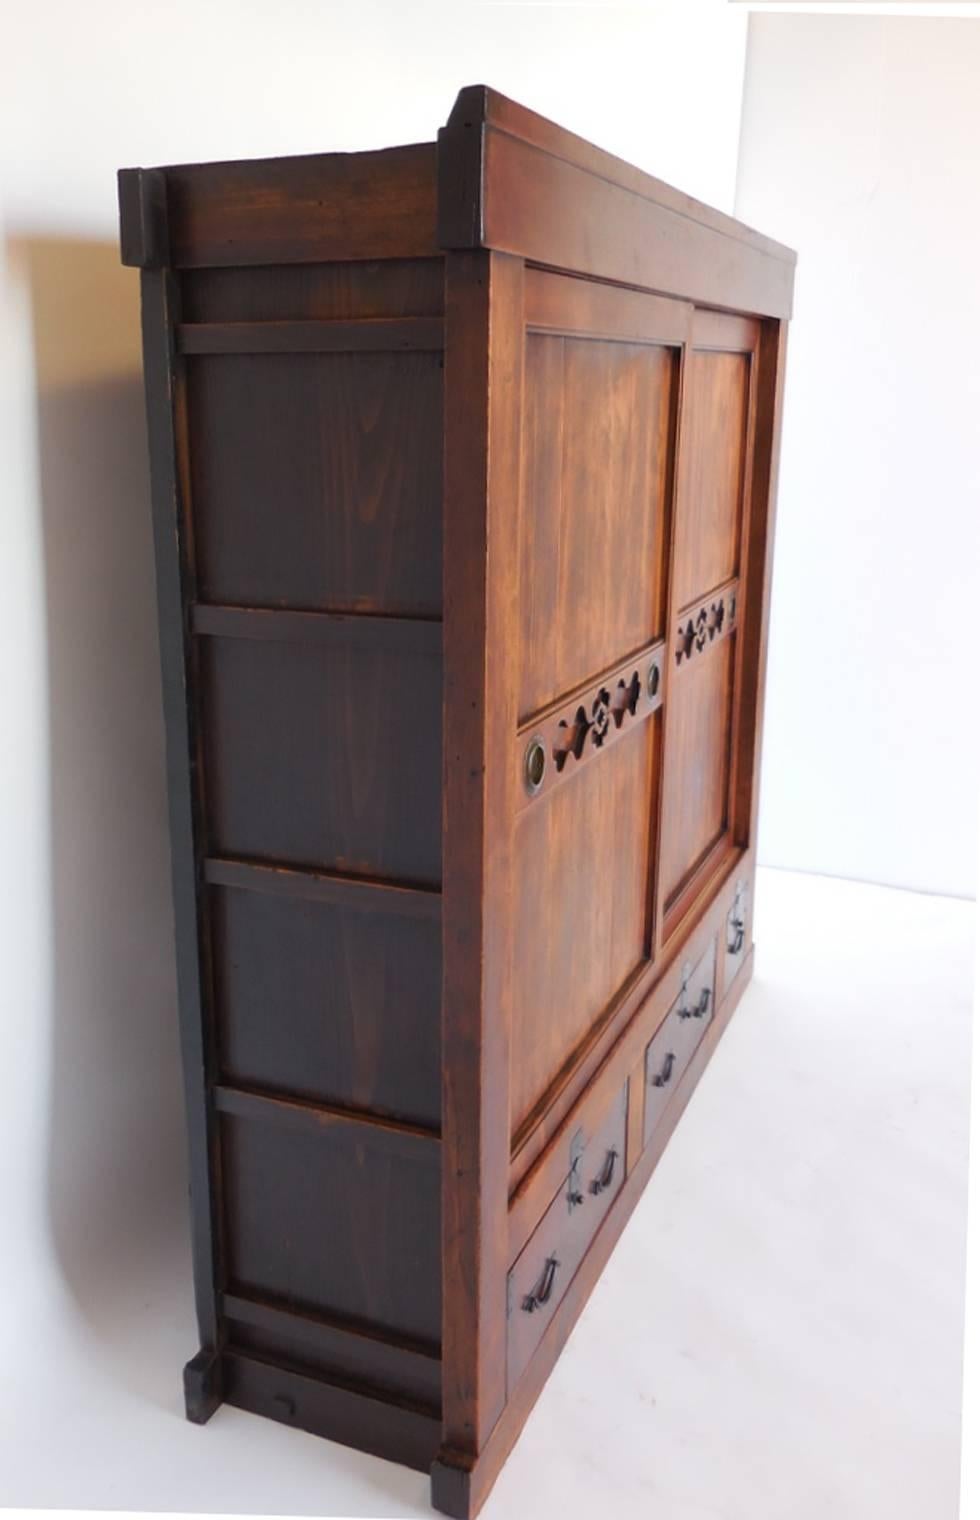 19th century Japanese tansu chest used for storing bedding. Cabinet has three drawers and a pair of sliding doors with decorative cutouts. Interior shelves. All original. Bamboo nails. Hinoki wood. Beautiful patina. Very functional.